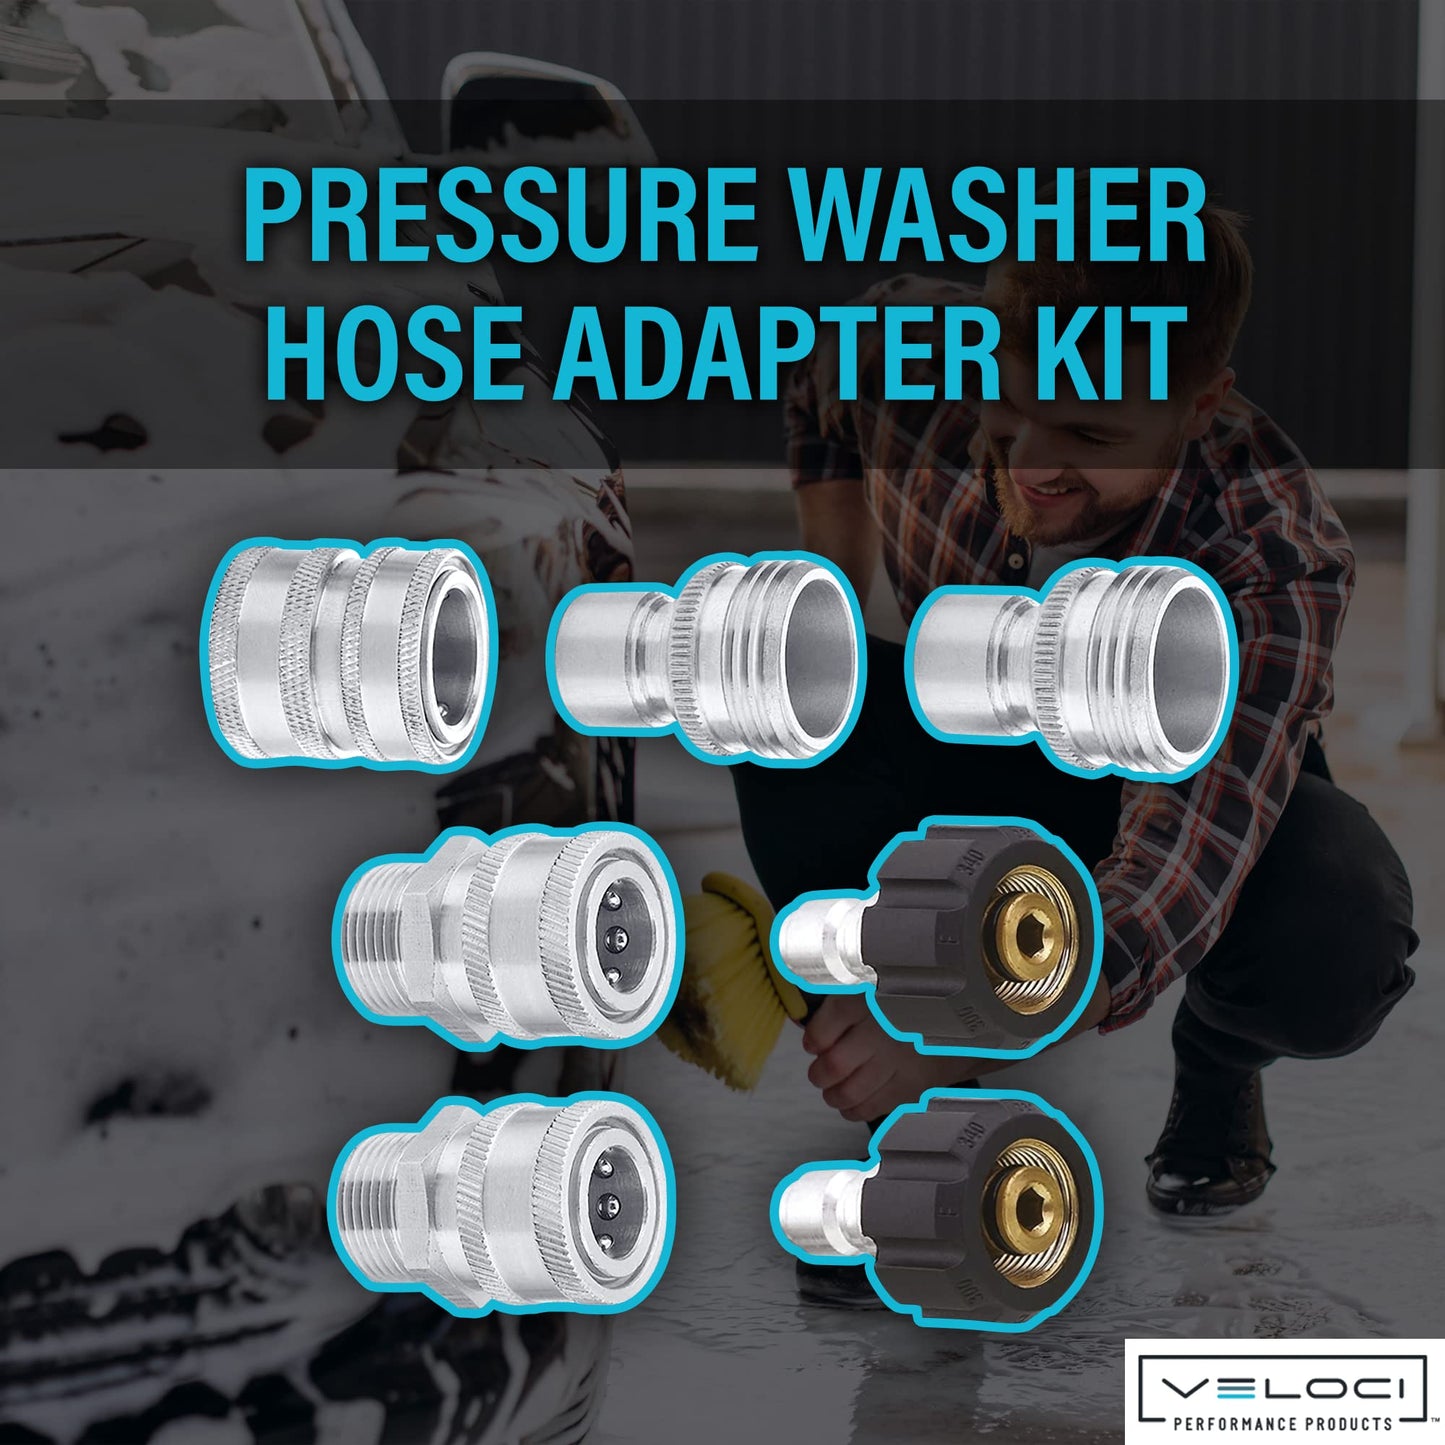 MTM Hydro Hose Adapter 7 Piece Pressure Washer Quick Connect Fittings Kit, Stainless Steel High Pressure Couplings and Connectors Adapters for Foam Cannons, Pressure Washers, and Hoses